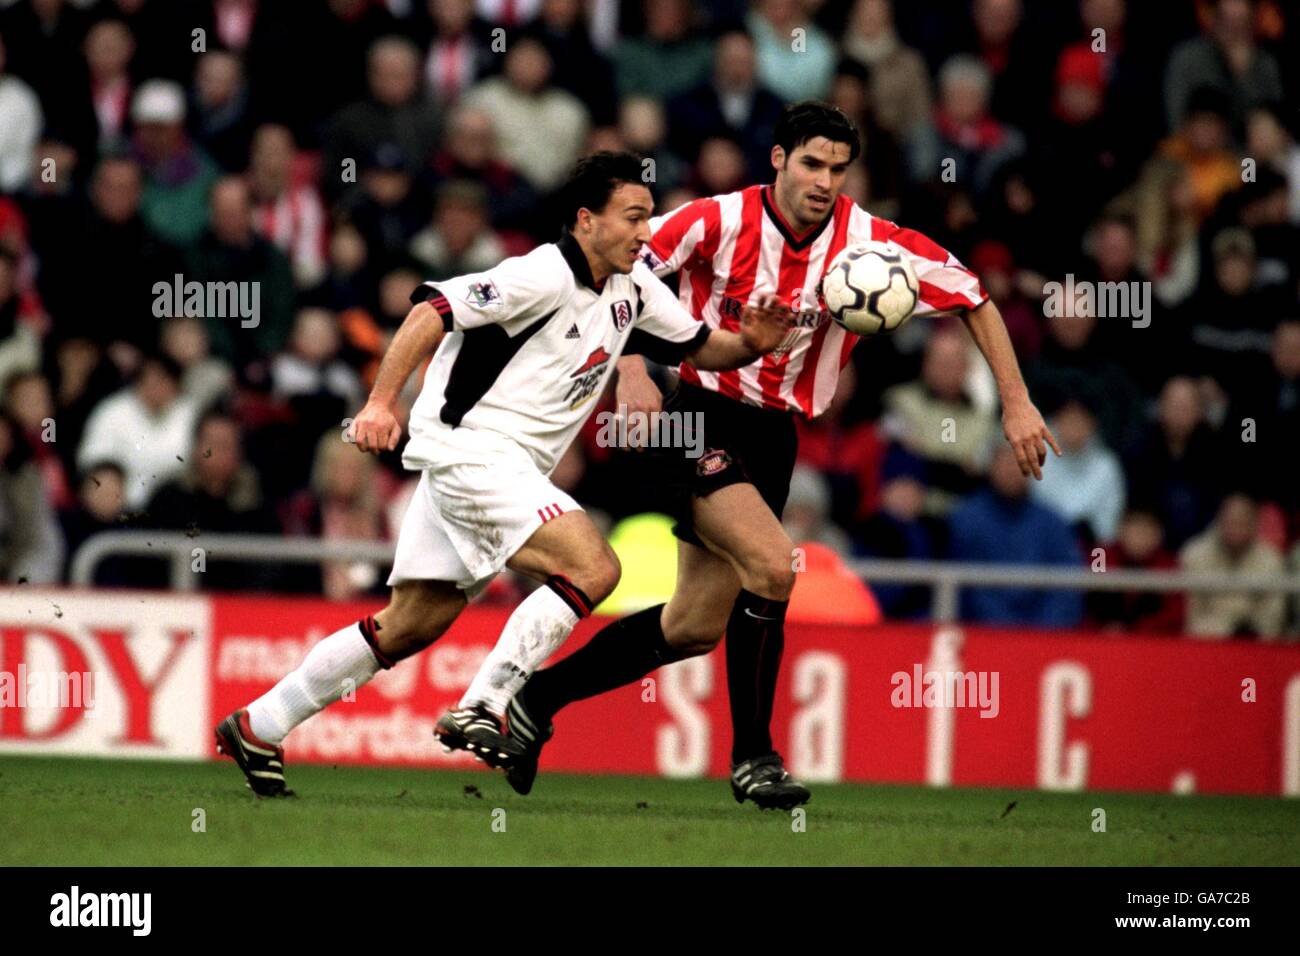 Soccer - FA Barclaycard Premiership - Sunderland v Fulham. Fulham's Steed Malbranque at Sunderland's Bernt Haas on his way to scoring the opening goal Stock Photo